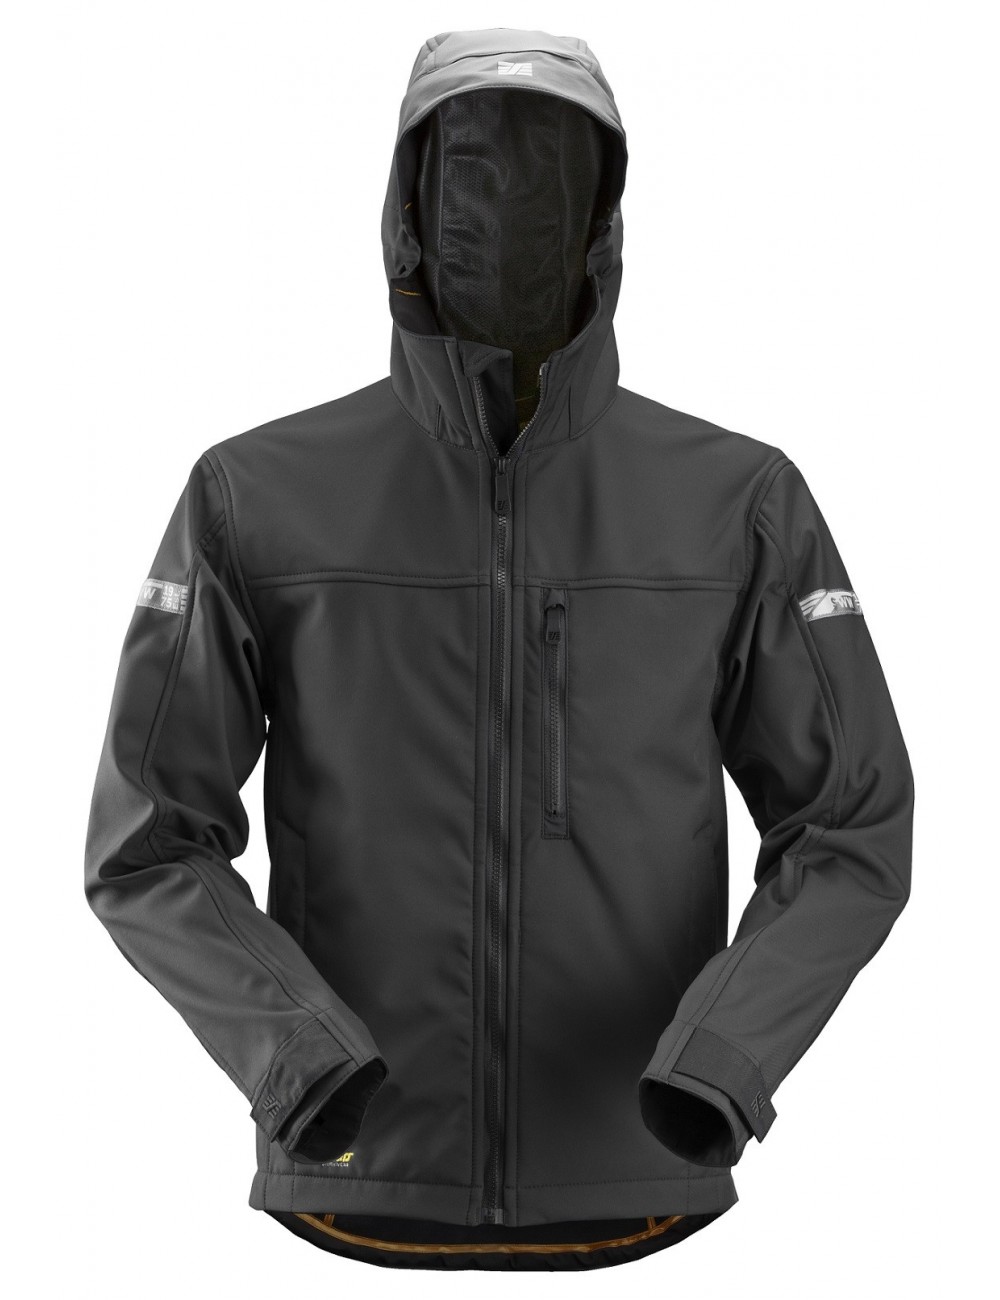 Snickers 1229 softshell jacket